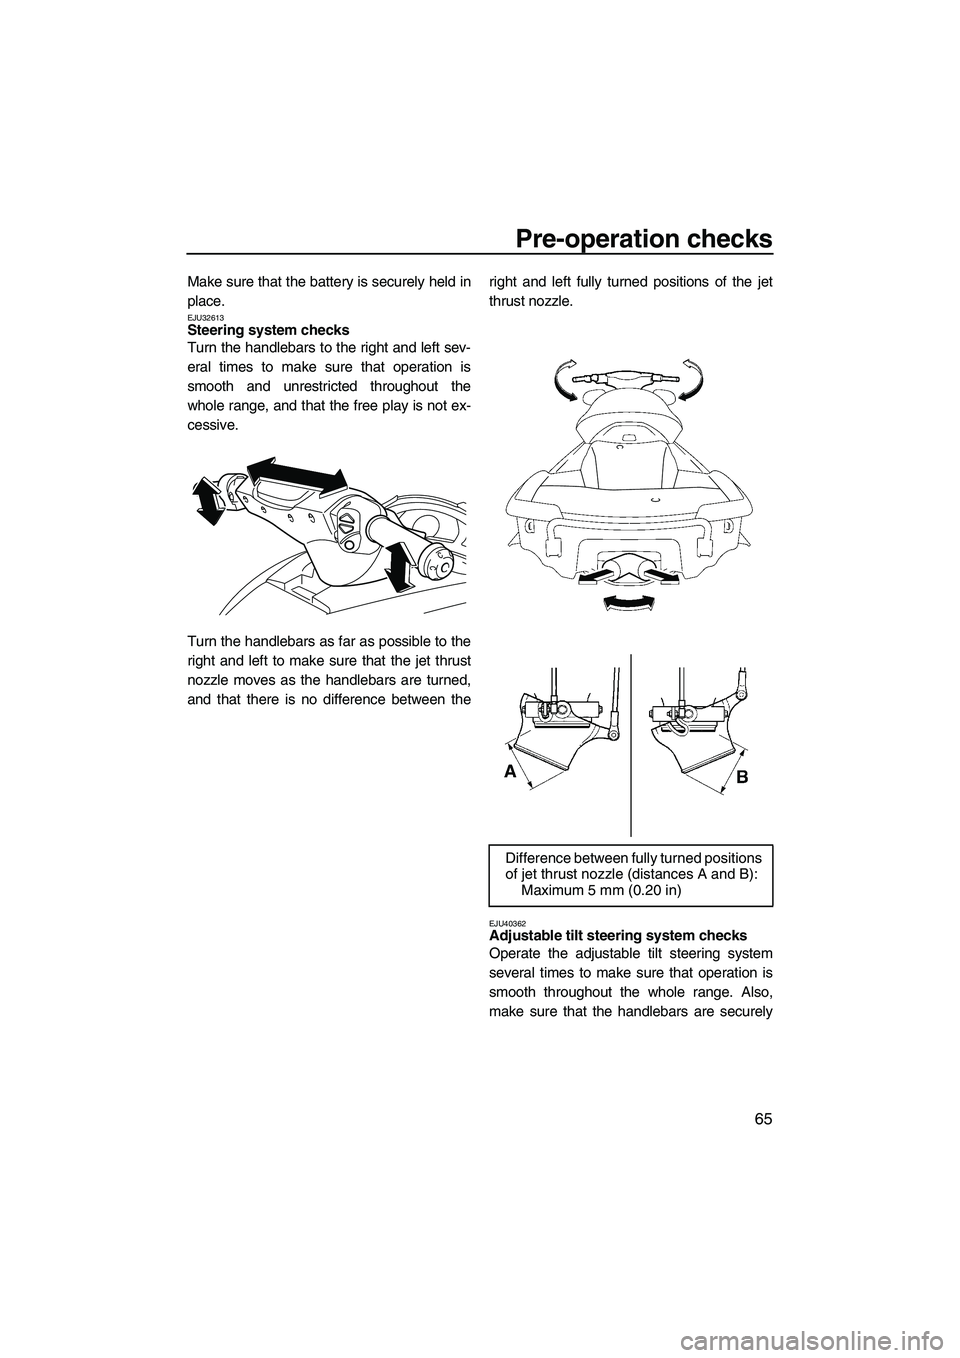 YAMAHA SVHO 2011  Owners Manual Pre-operation checks
65
Make sure that the battery is securely held in
place.
EJU32613Steering system checks 
Turn the handlebars to the right and left sev-
eral times to make sure that operation is
s